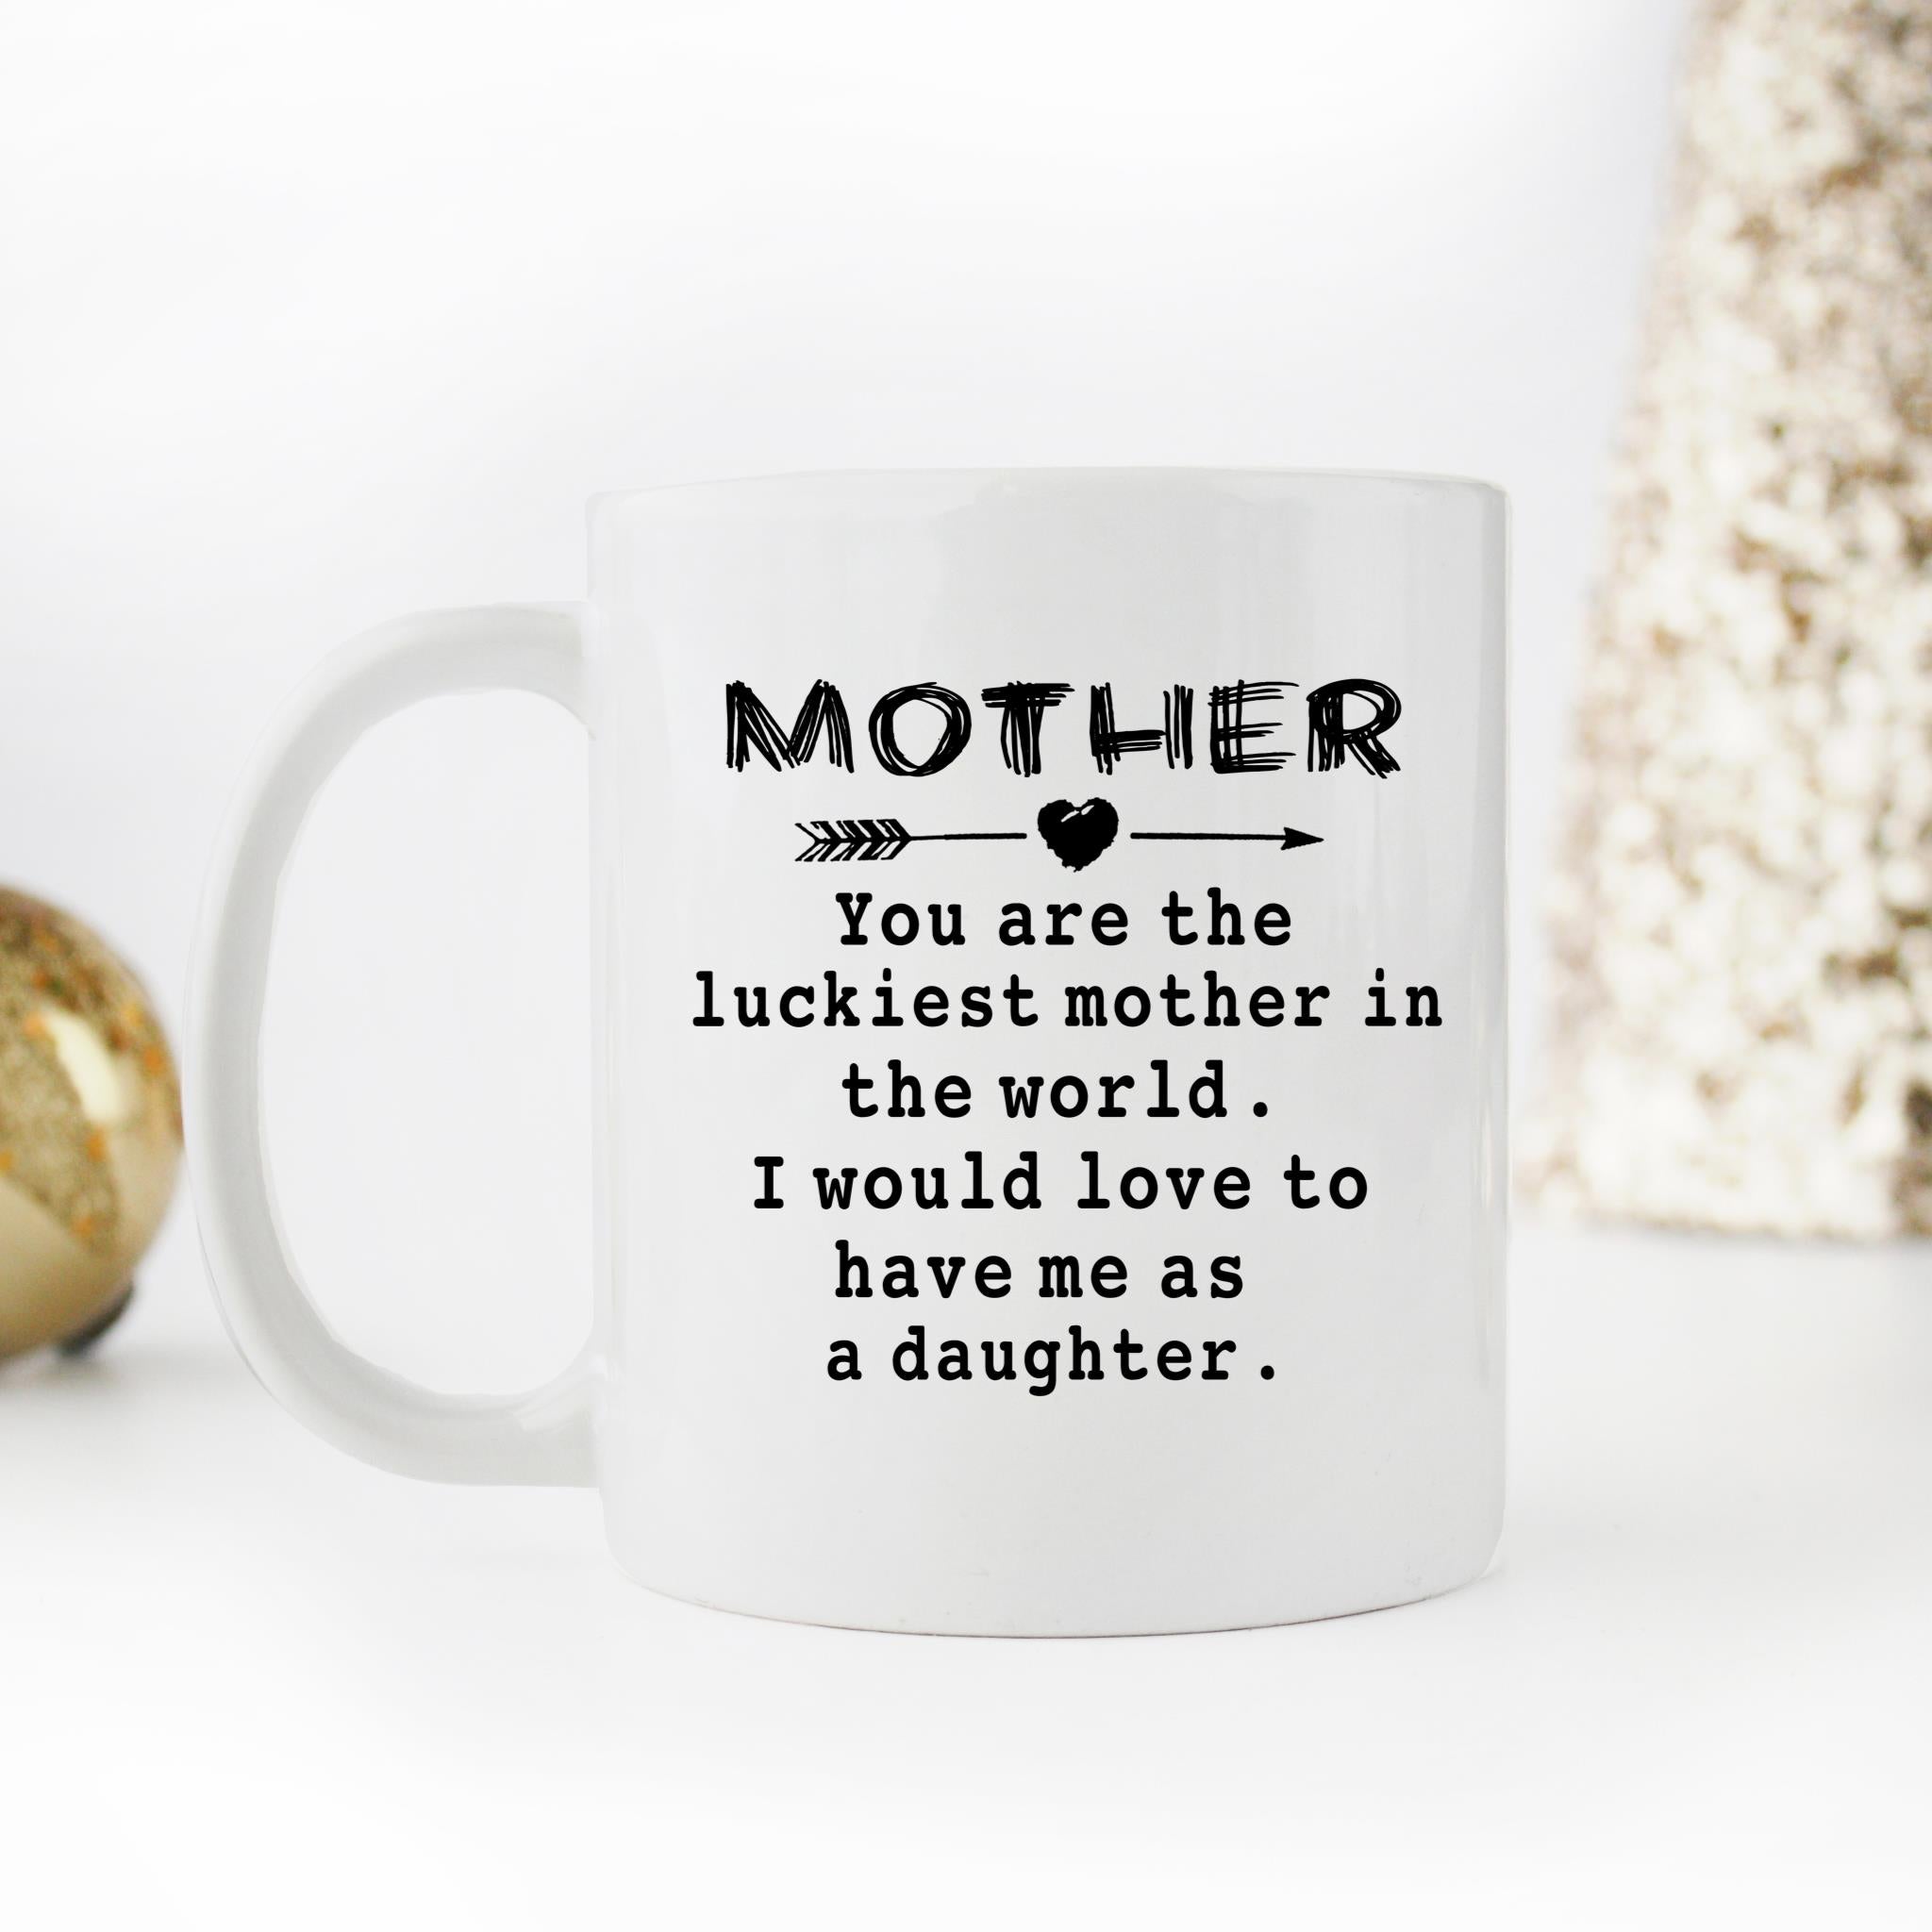 Skitongifts Funny Ceramic Novelty Coffee Mug You're The Luckiest Mother In The World. I Would Love To Have Me As A Daughter Mothers Day Gifts Ideas